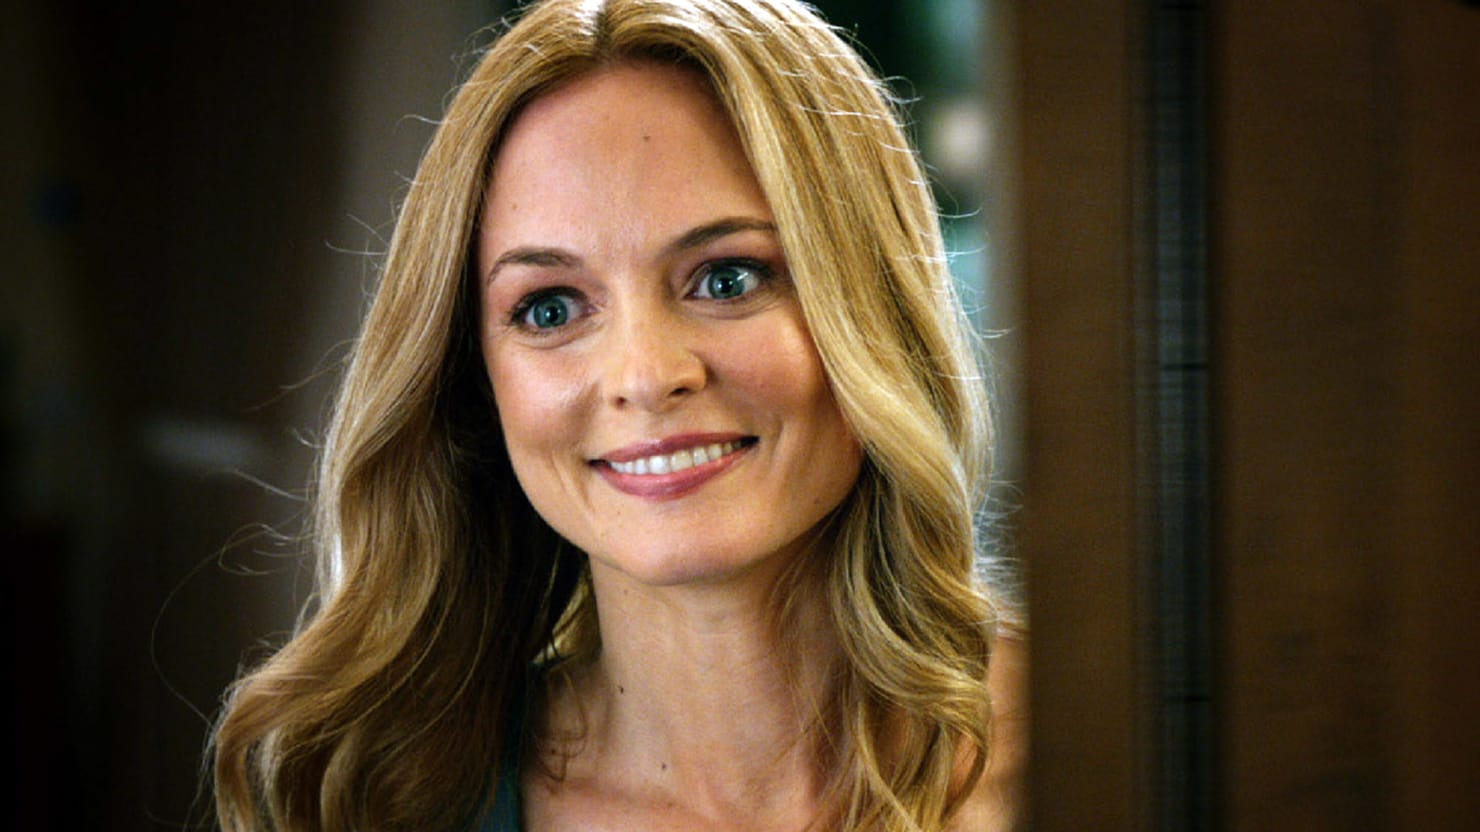 Heather Graham on The Hangover Part III, Roles for Women, and More